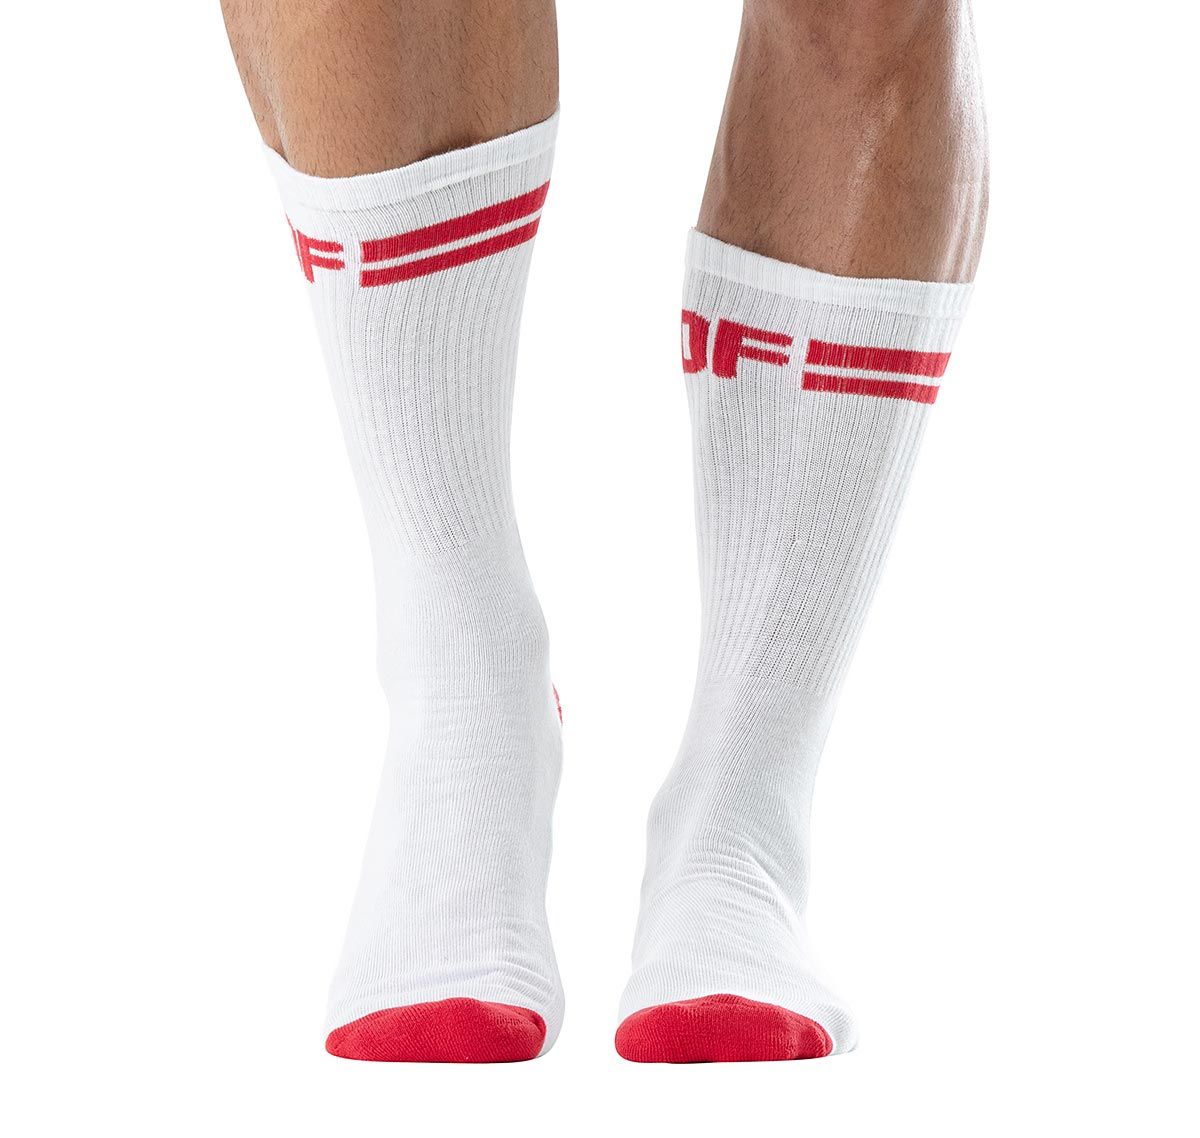 TOF Chaussettes de sport SPORT SOCKS WHITE/RED TOF232BR, blanc/rouge